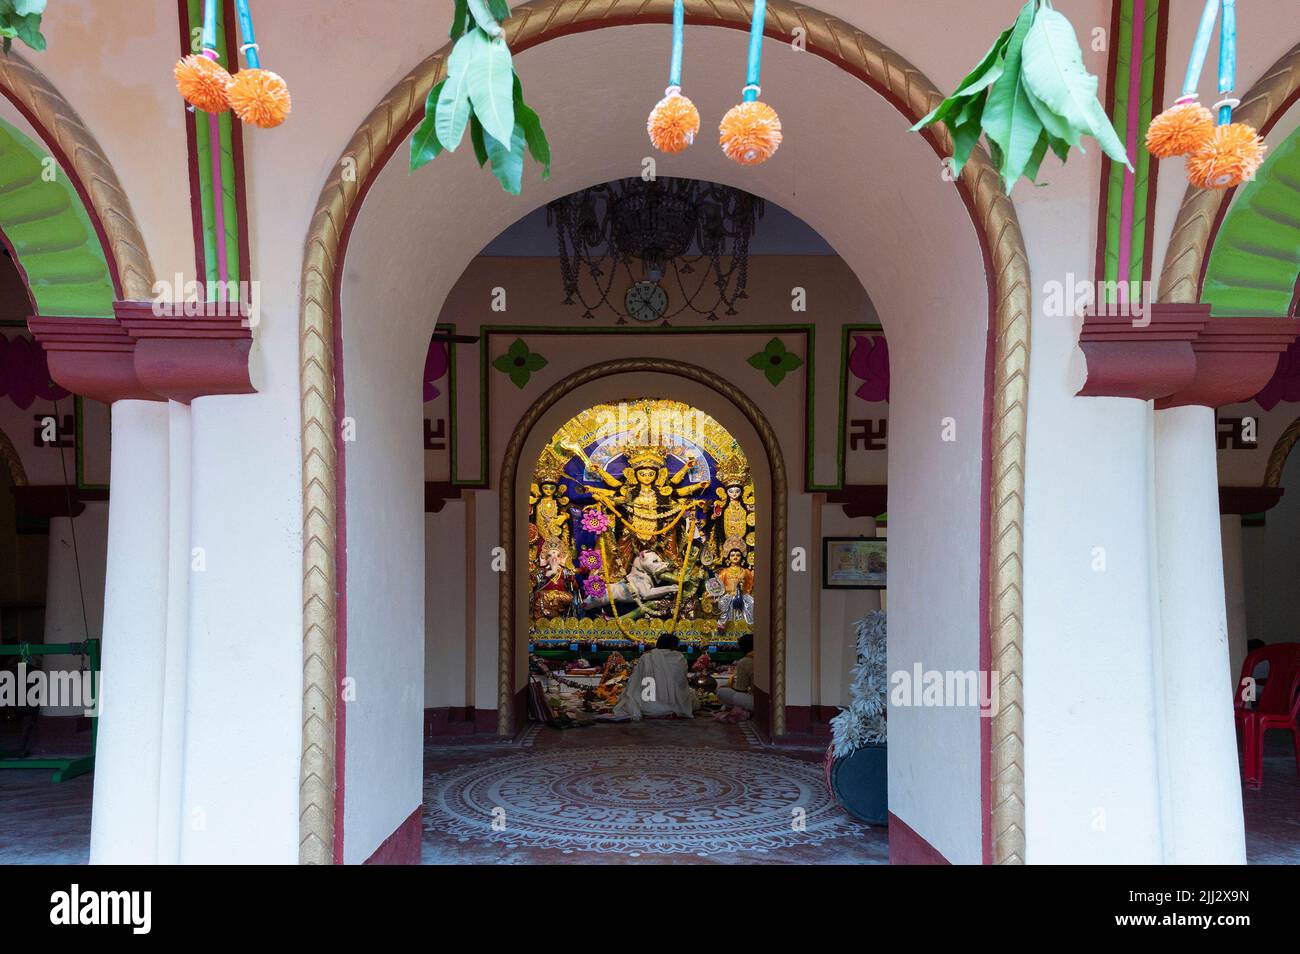 Howrah, India -October 26th, 2020 : Hindu Purohit worshipping Goddess Durga inside old age decorated home. Durga Puja, biggest festival of Hinduism. Stock Photo